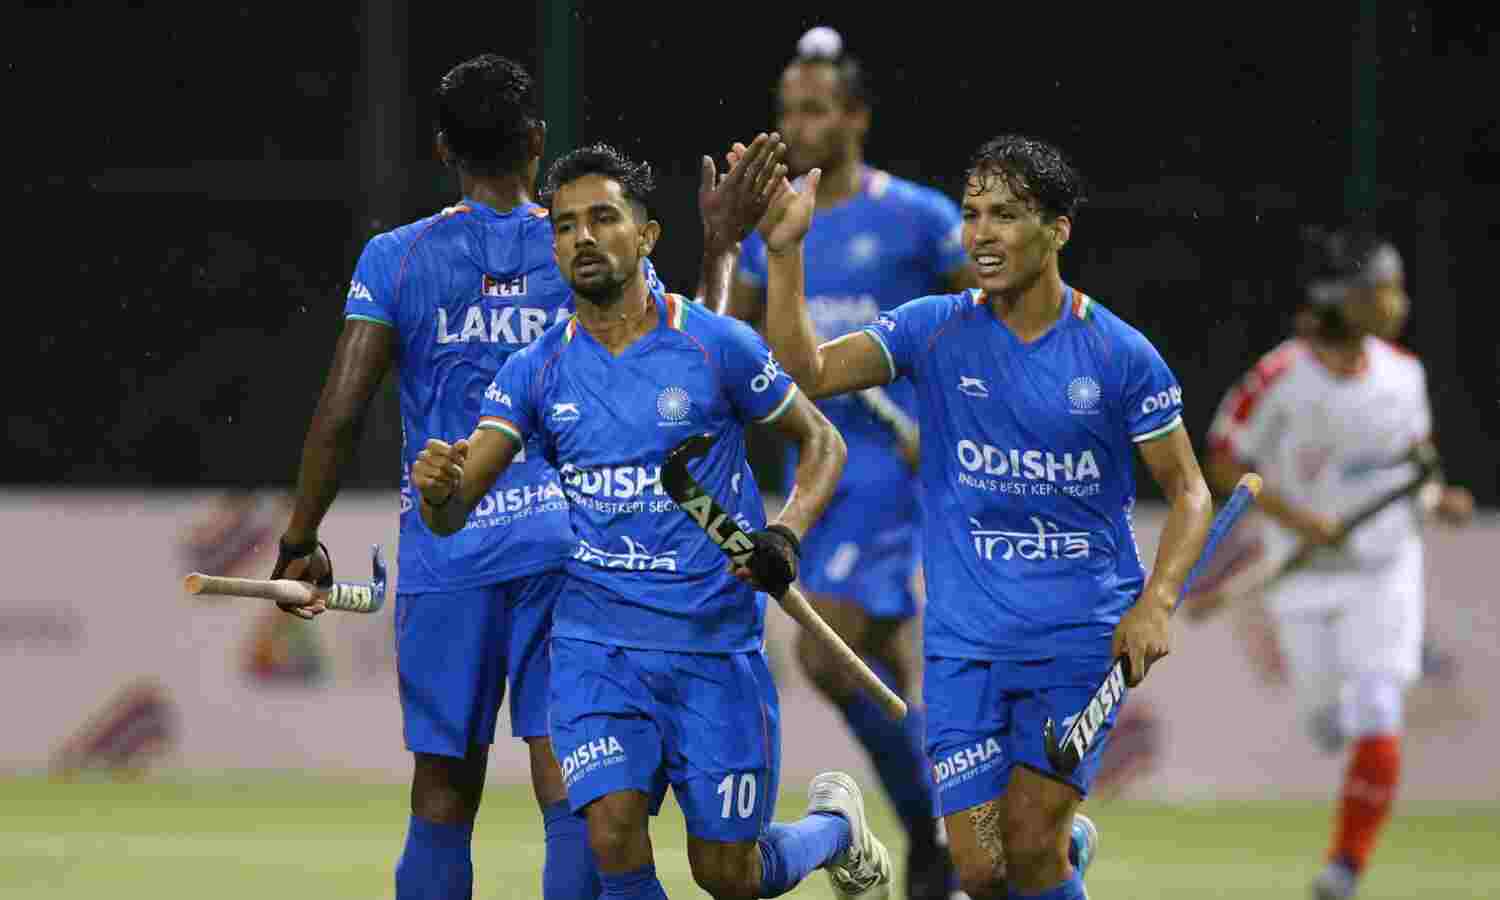 Sultan Azlan Shah Cup India junior mens hockey team goes down 4-5 to South Africa